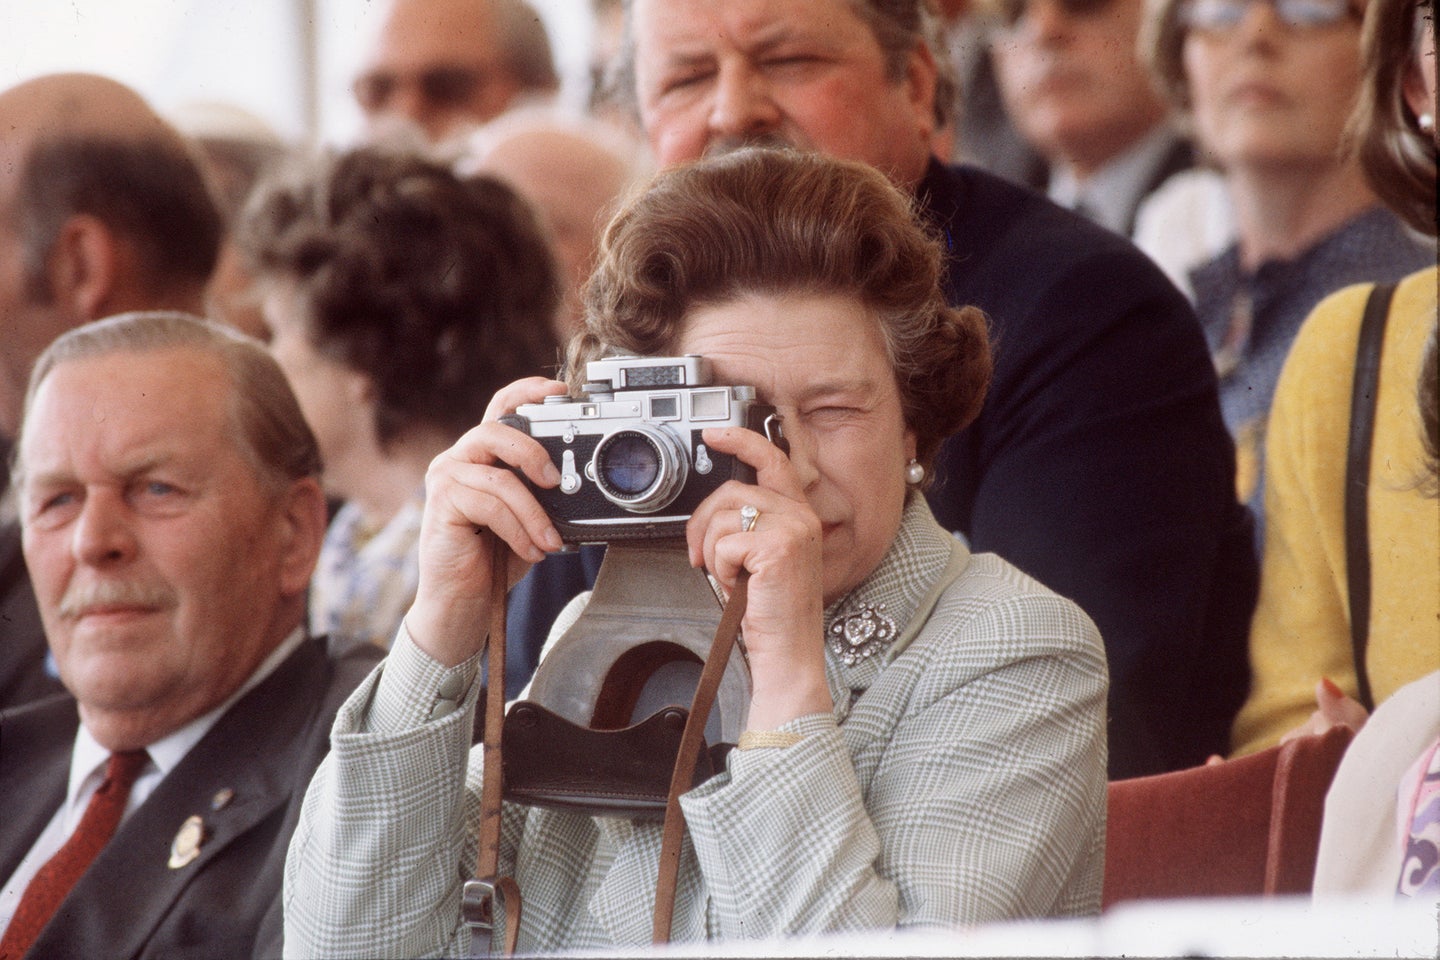 The queen taking a picture at the Royal Windsor Horse Show.